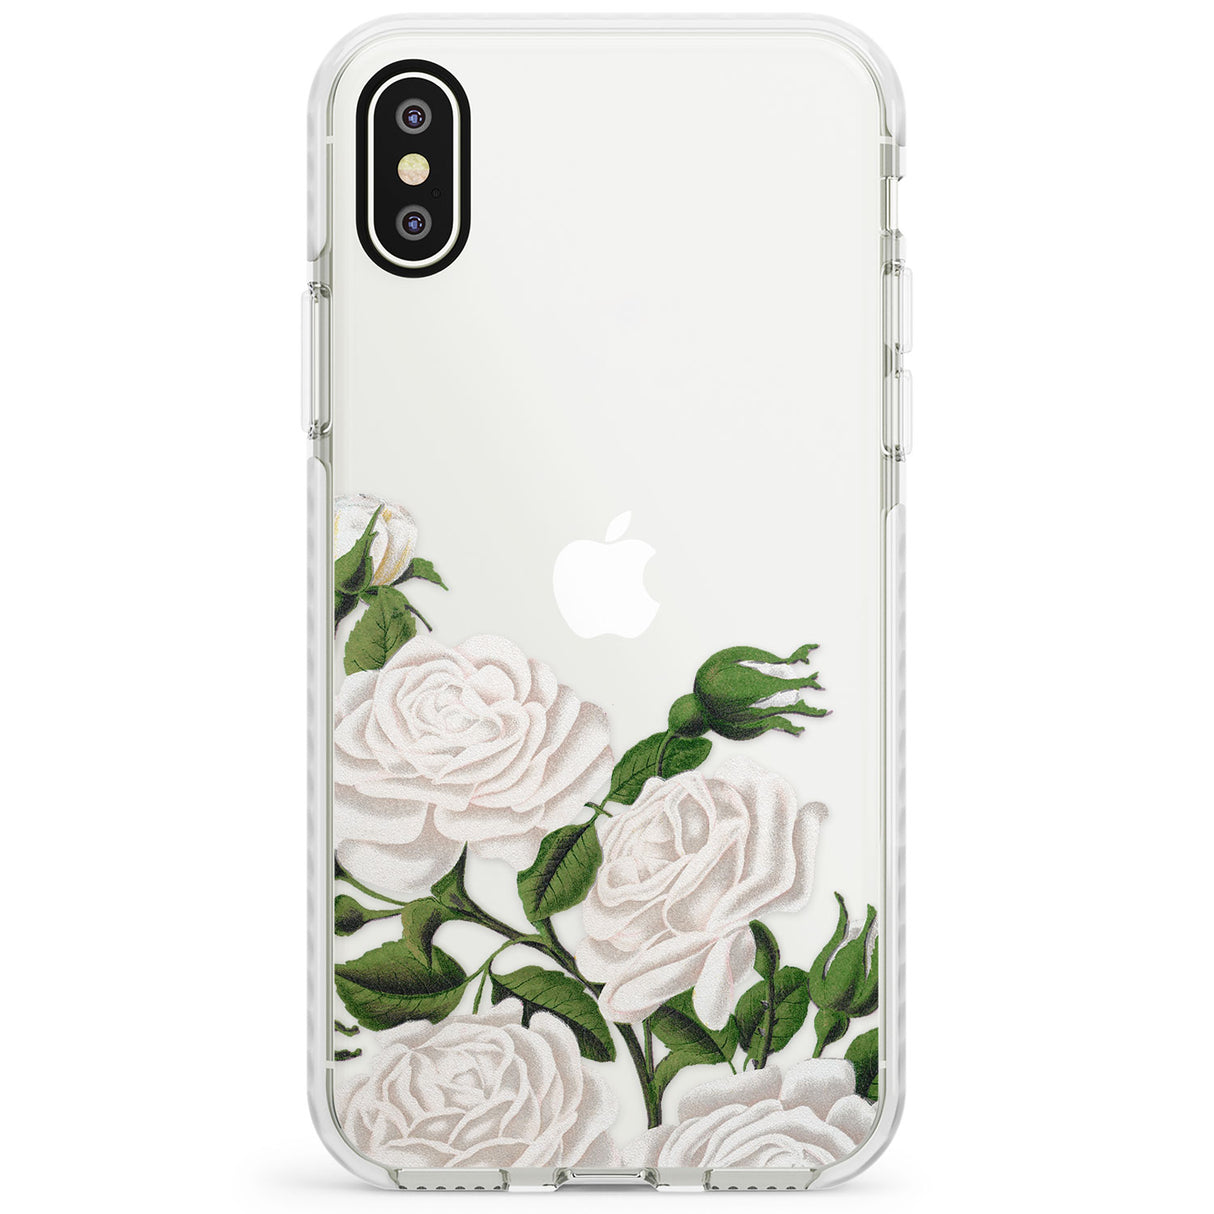 White Vintage Painted Flowers Impact Phone Case for iPhone X XS Max XR